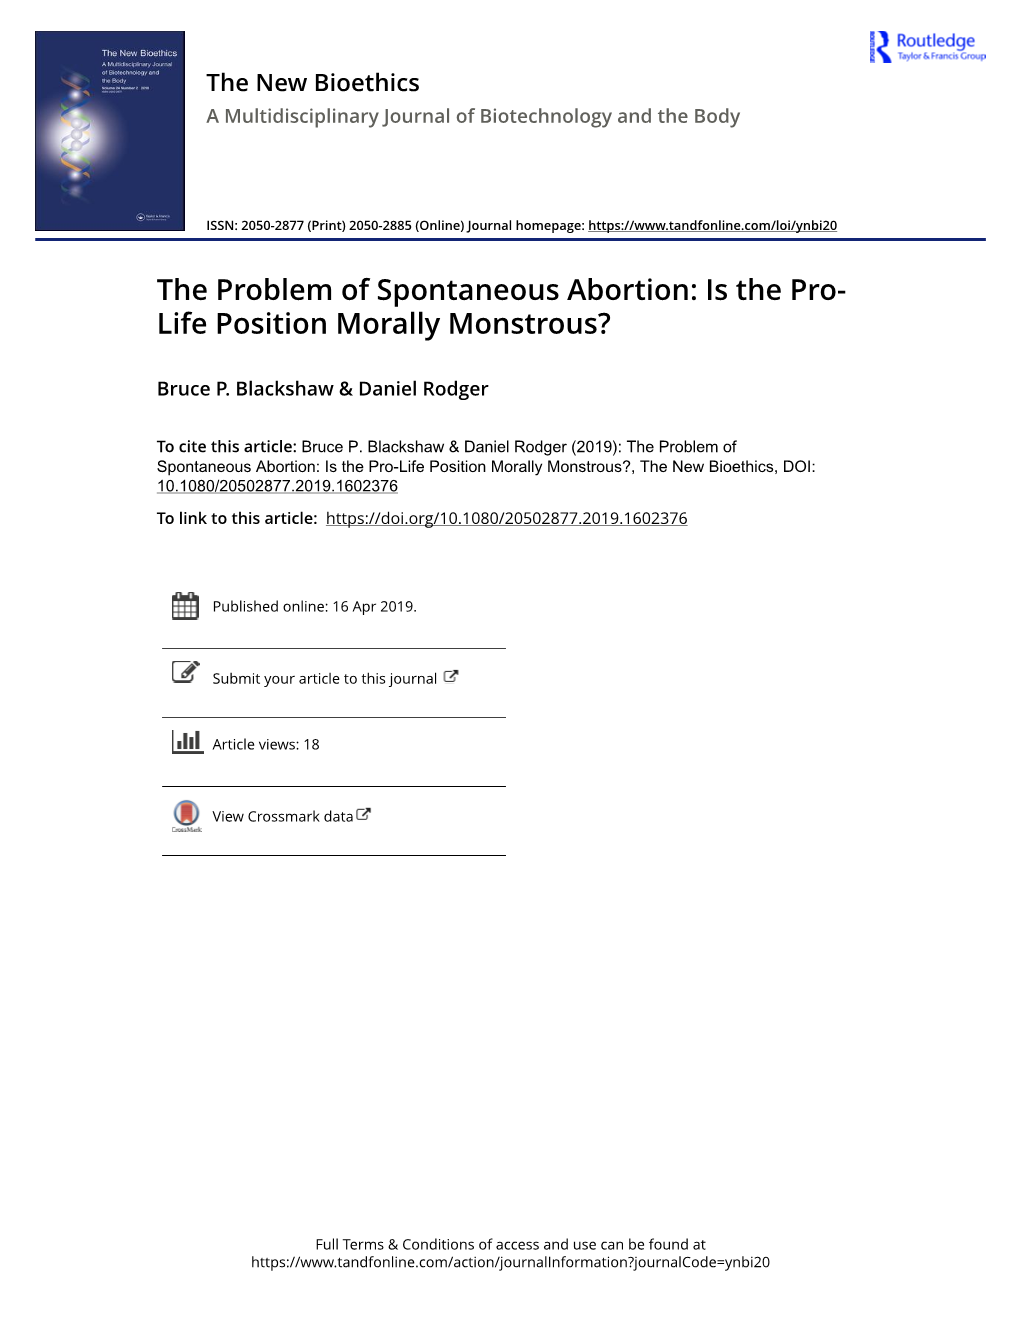 The Problem of Spontaneous Abortion: Is the Pro-Life Position Morally